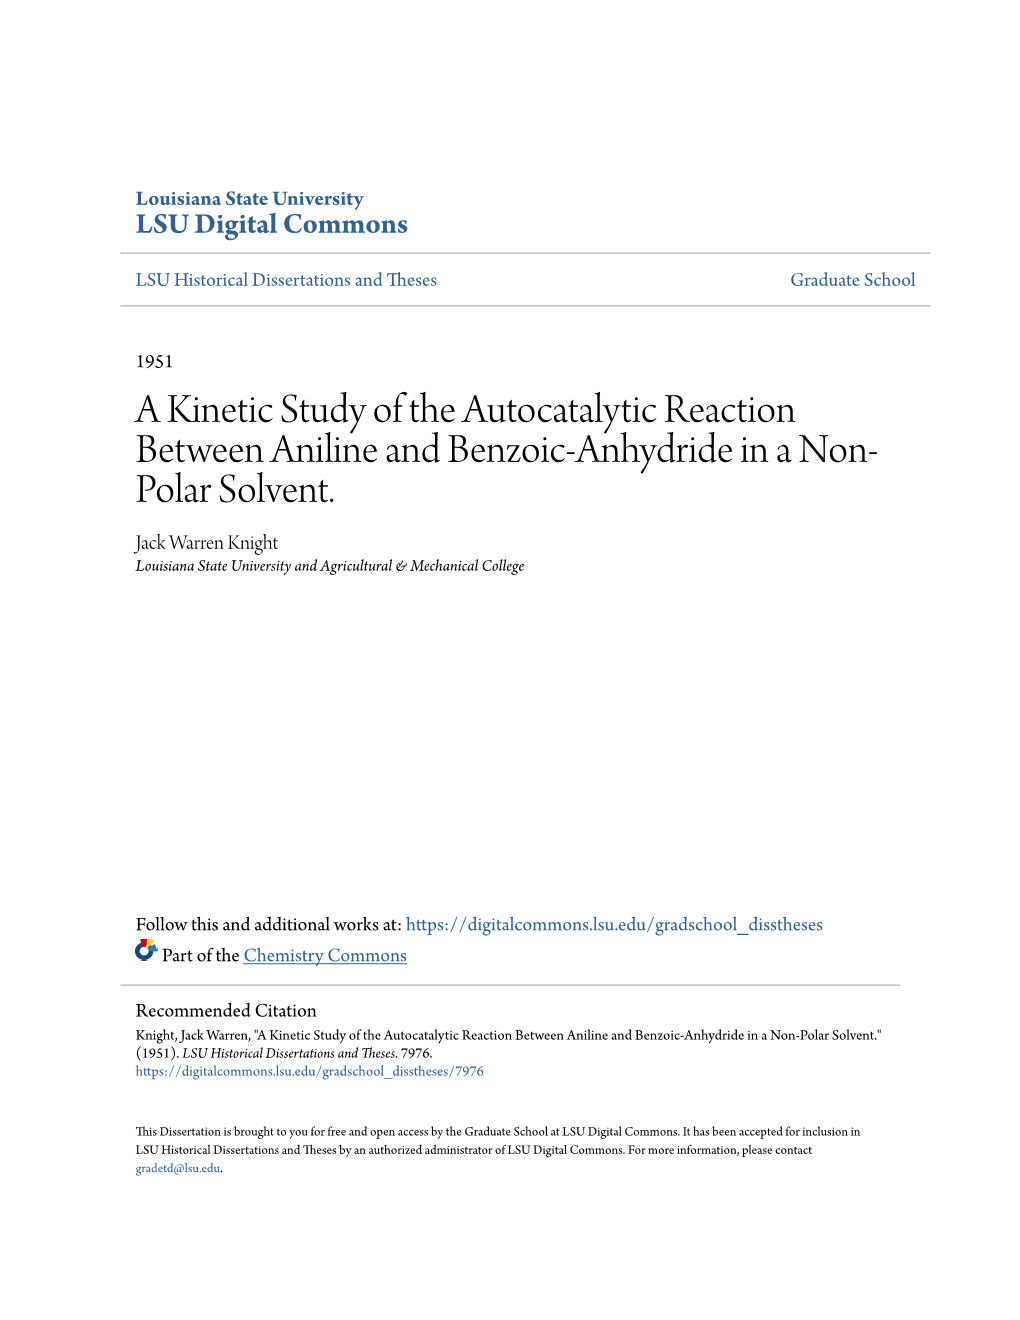 A Kinetic Study of the Autocatalytic Reaction Between Aniline and Benzoic-Anhydride in a Non- Polar Solvent